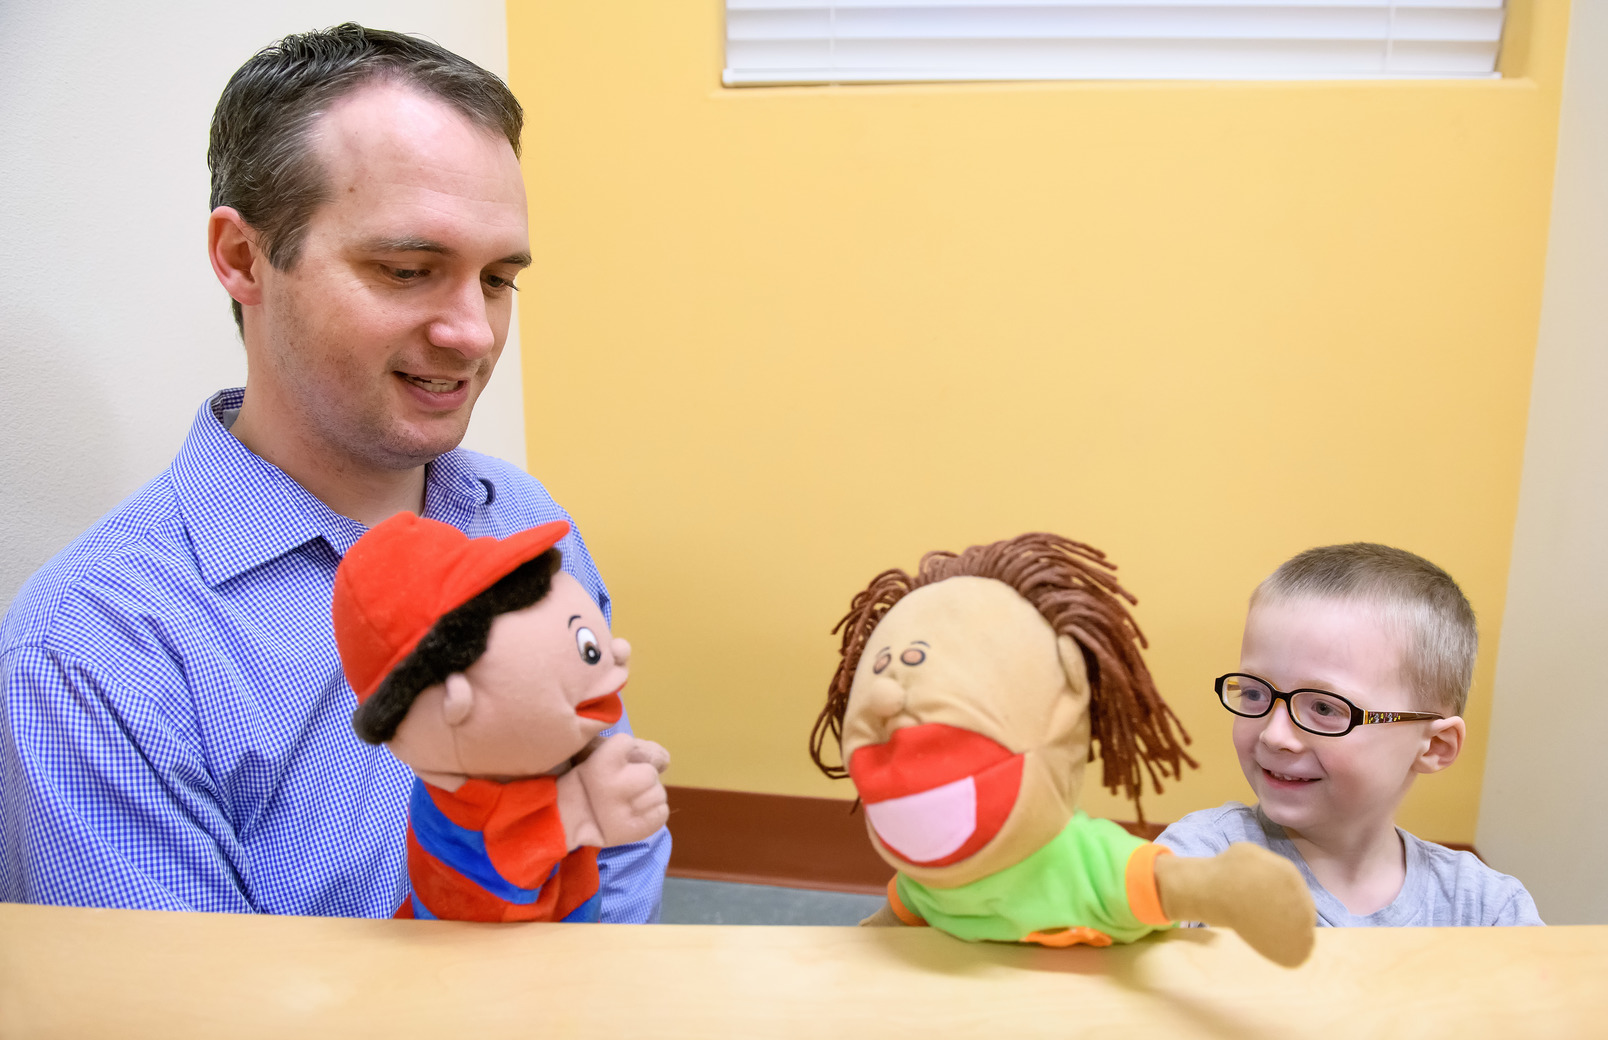 Counselor playing with puppets with client